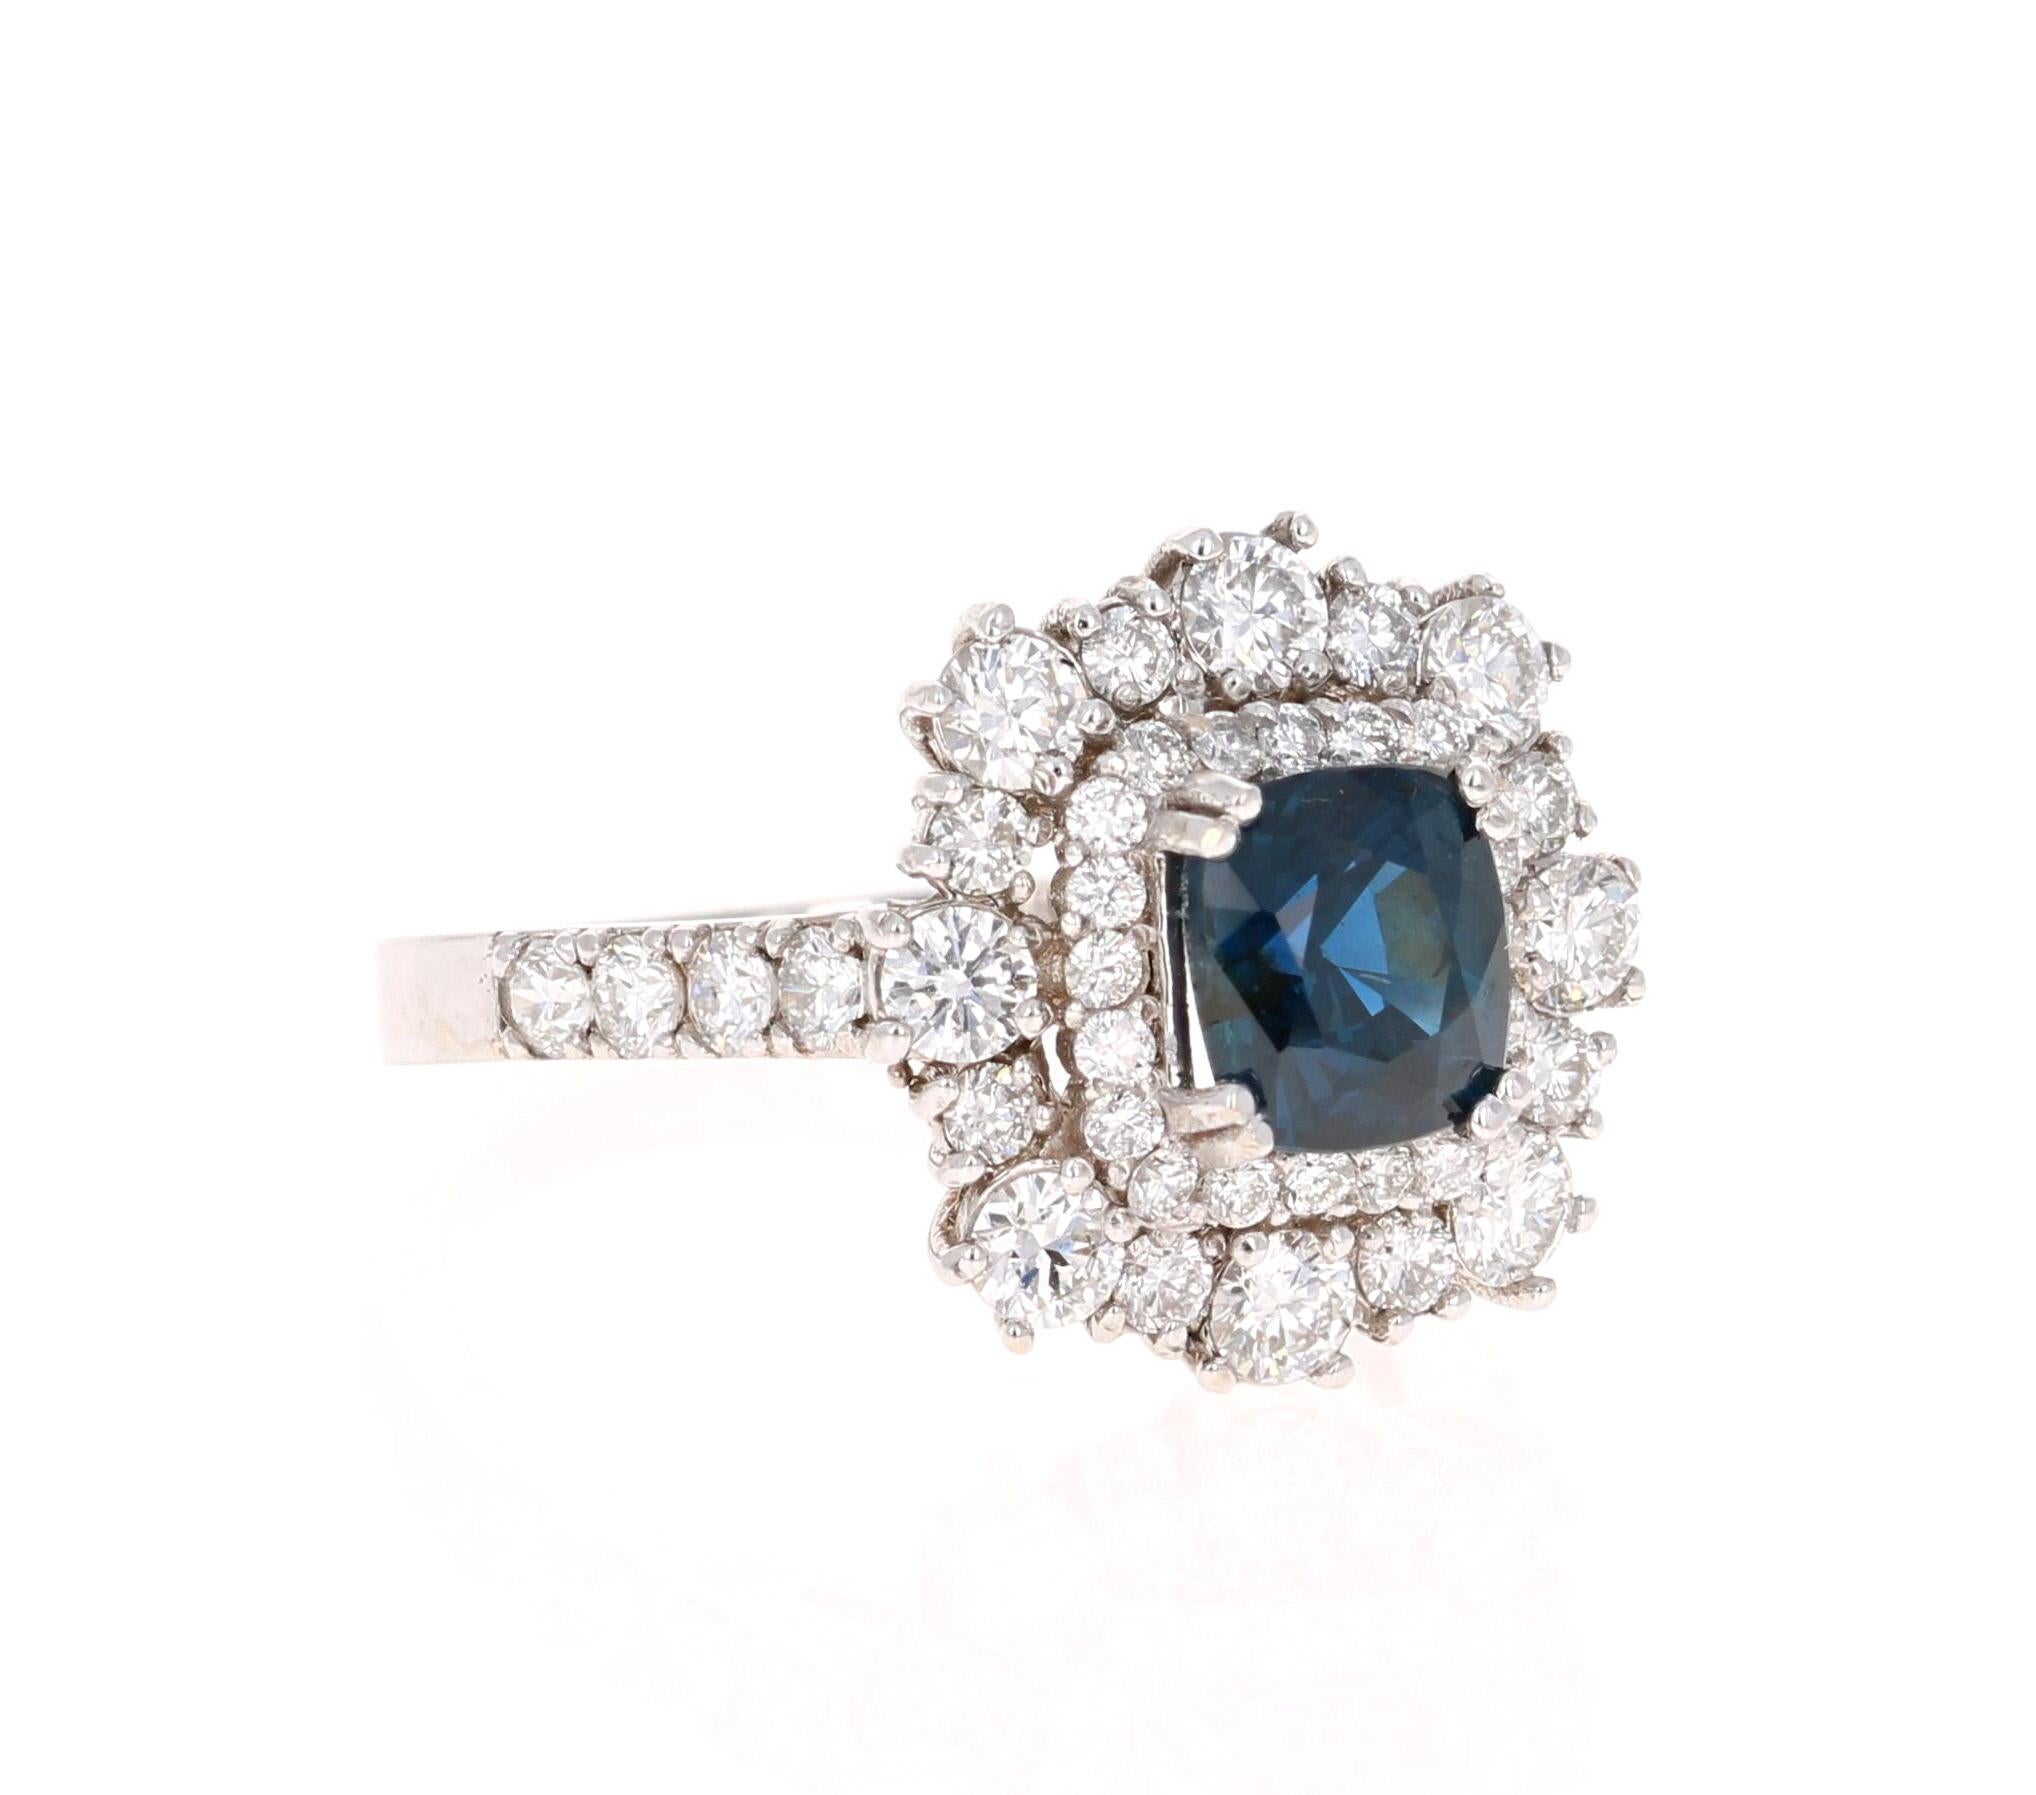 Beautiful Sapphire Diamond ring with an intricate setting! 

This ring has a Blue Sapphire that weighs 1.54 Carats and is GIA Certified. The Sapphire is a natural Blue Cushion Cut with NO indications of heating. The GIA Certificate Number is: